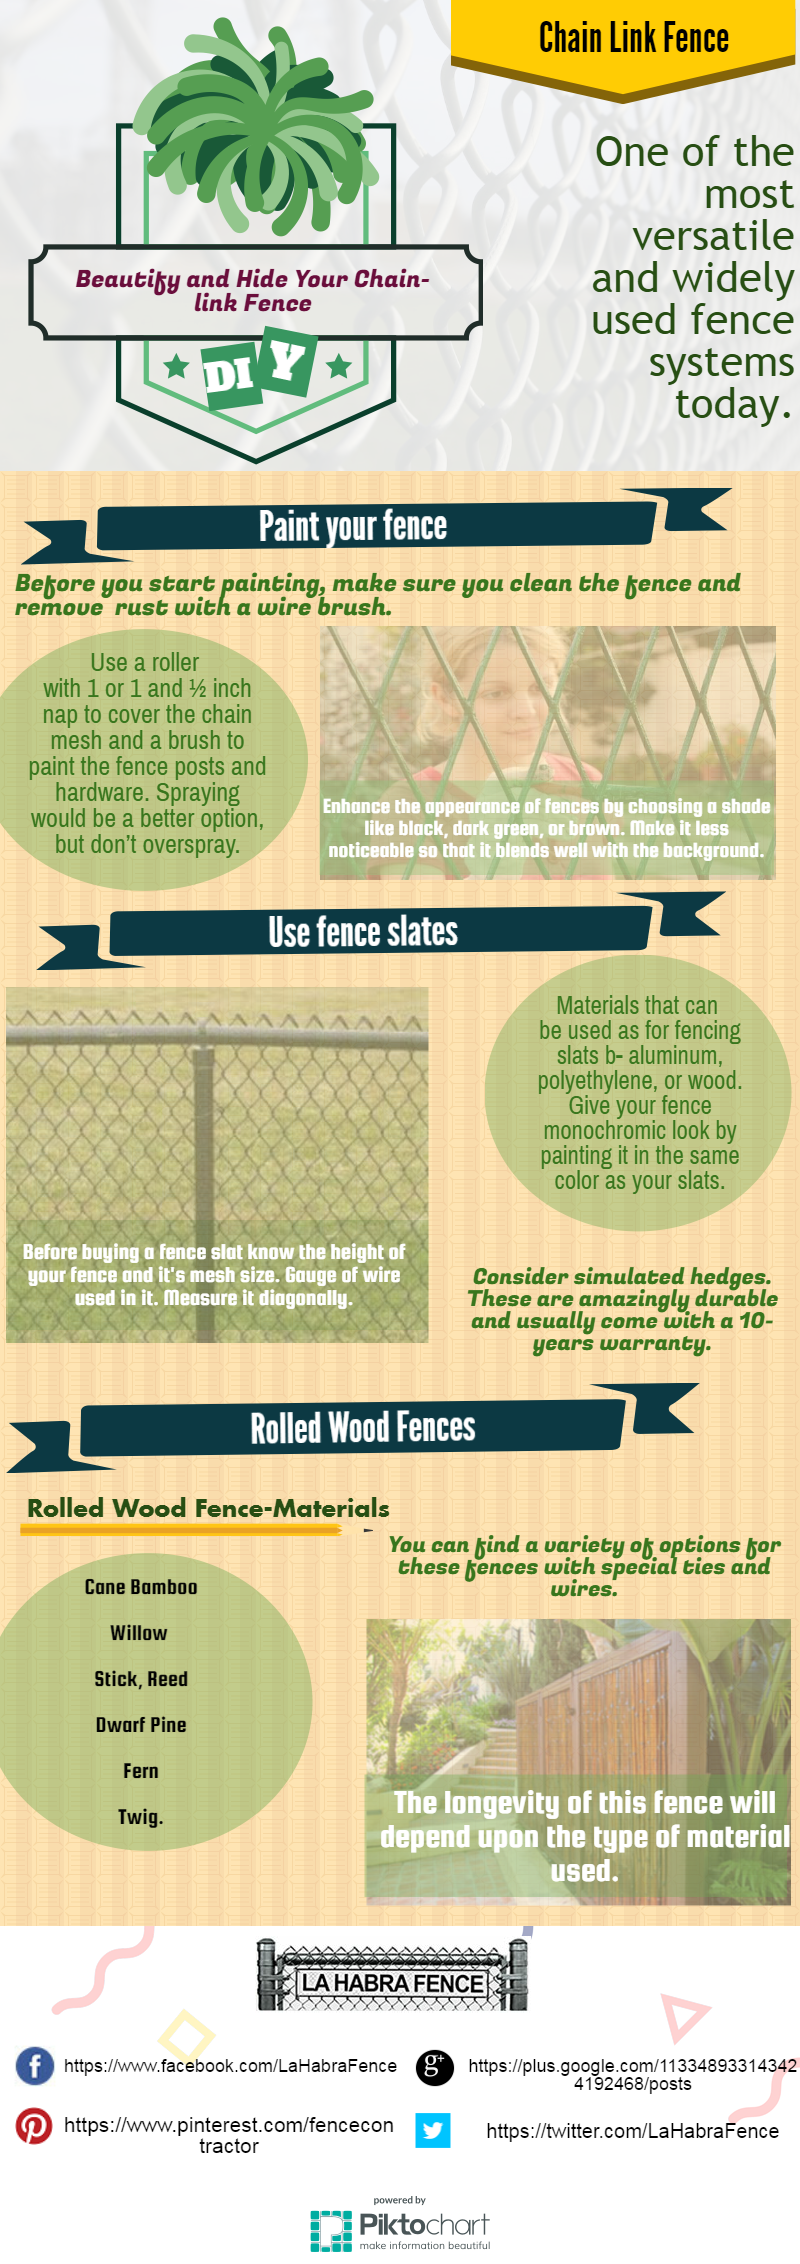 Beautify and hide chain link fence infographic